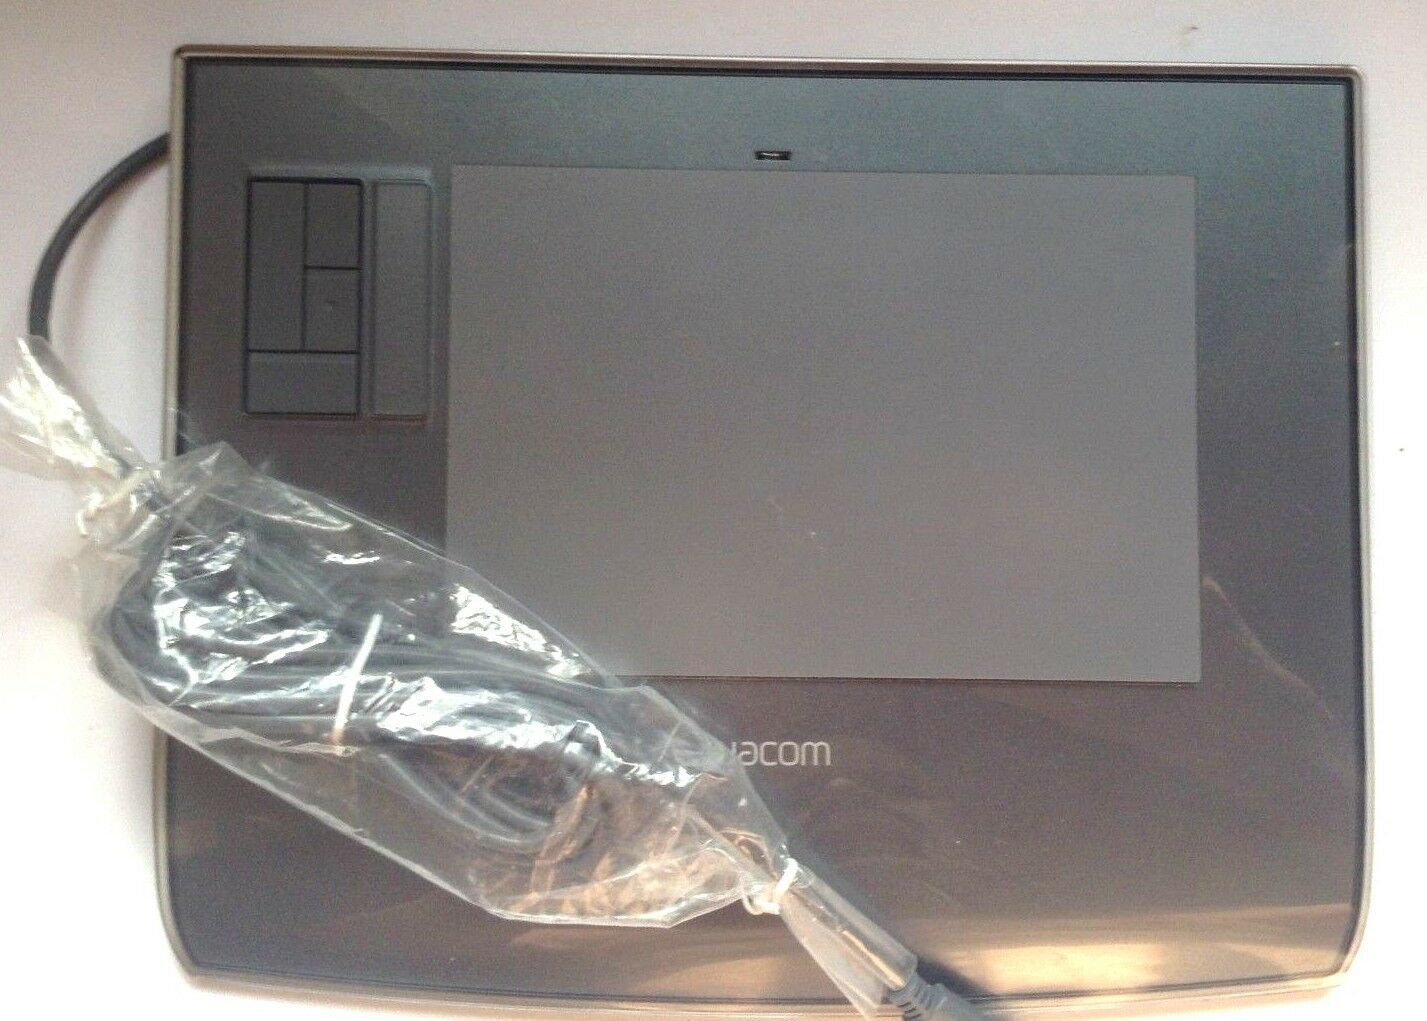 Wacom Intuos 3 PTZ-431W Drawing Graphics Gray Pad Tablet ONLY